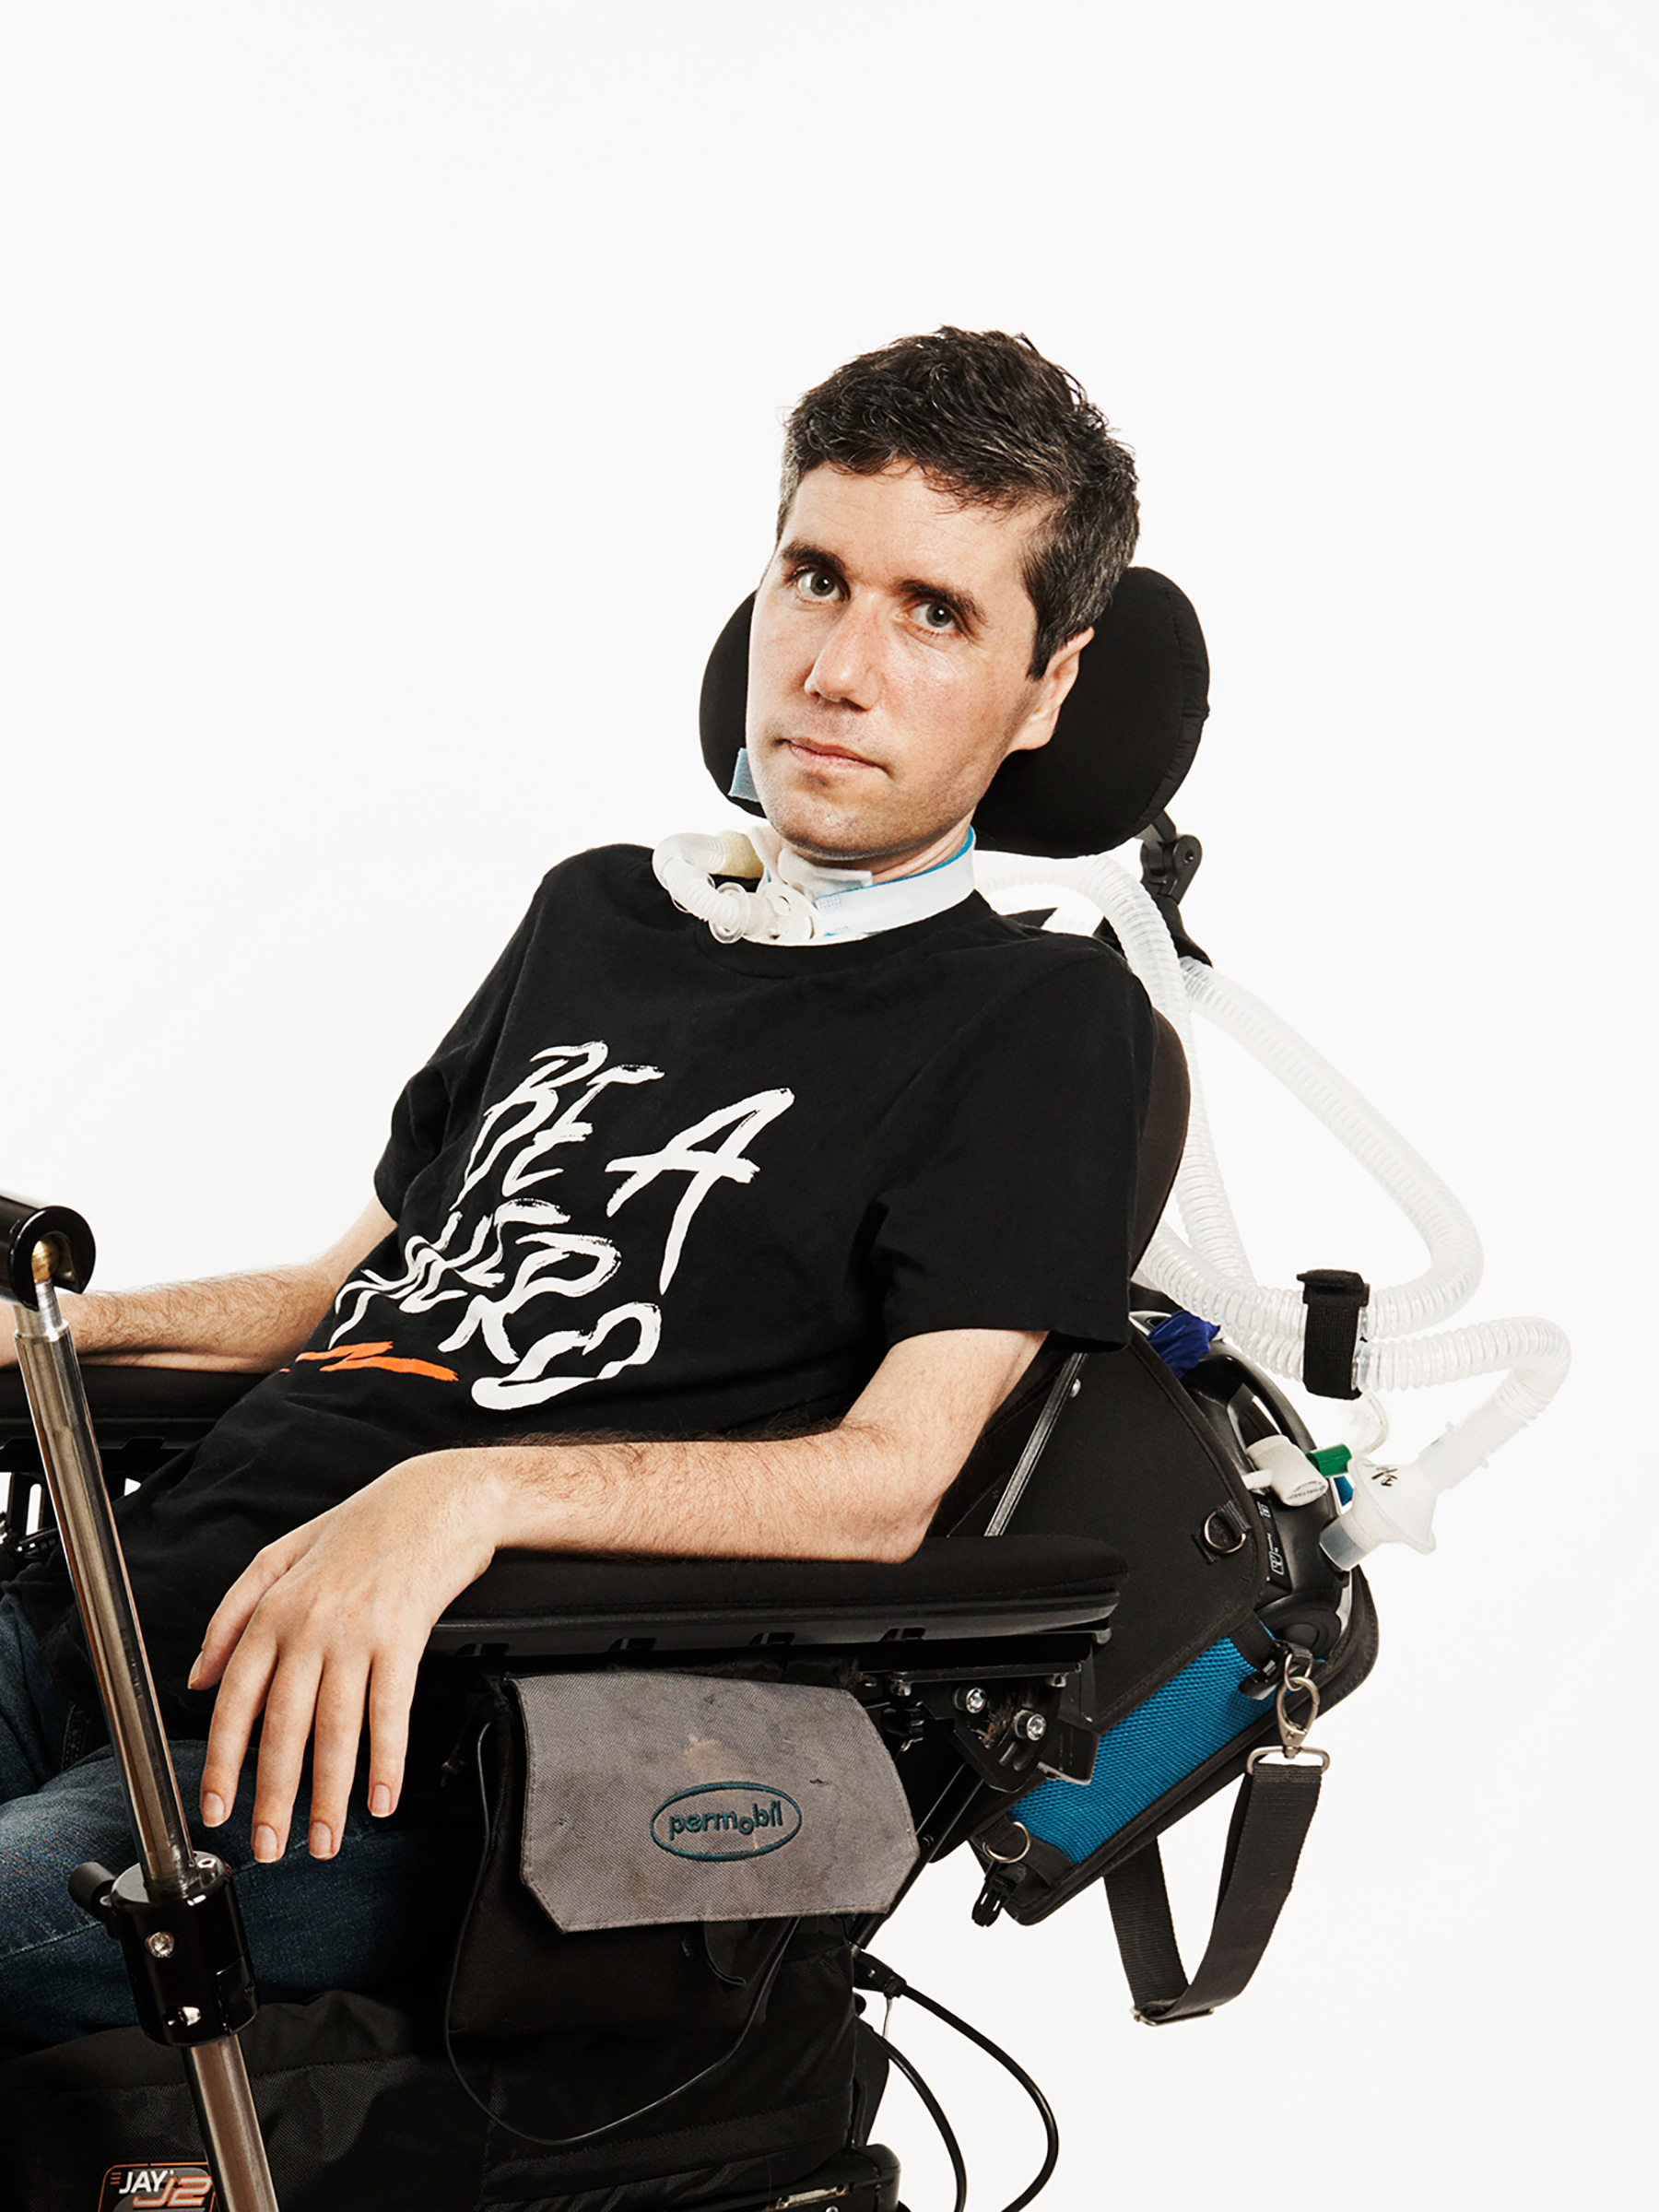 TIME 100 Icons: Ady Barkan